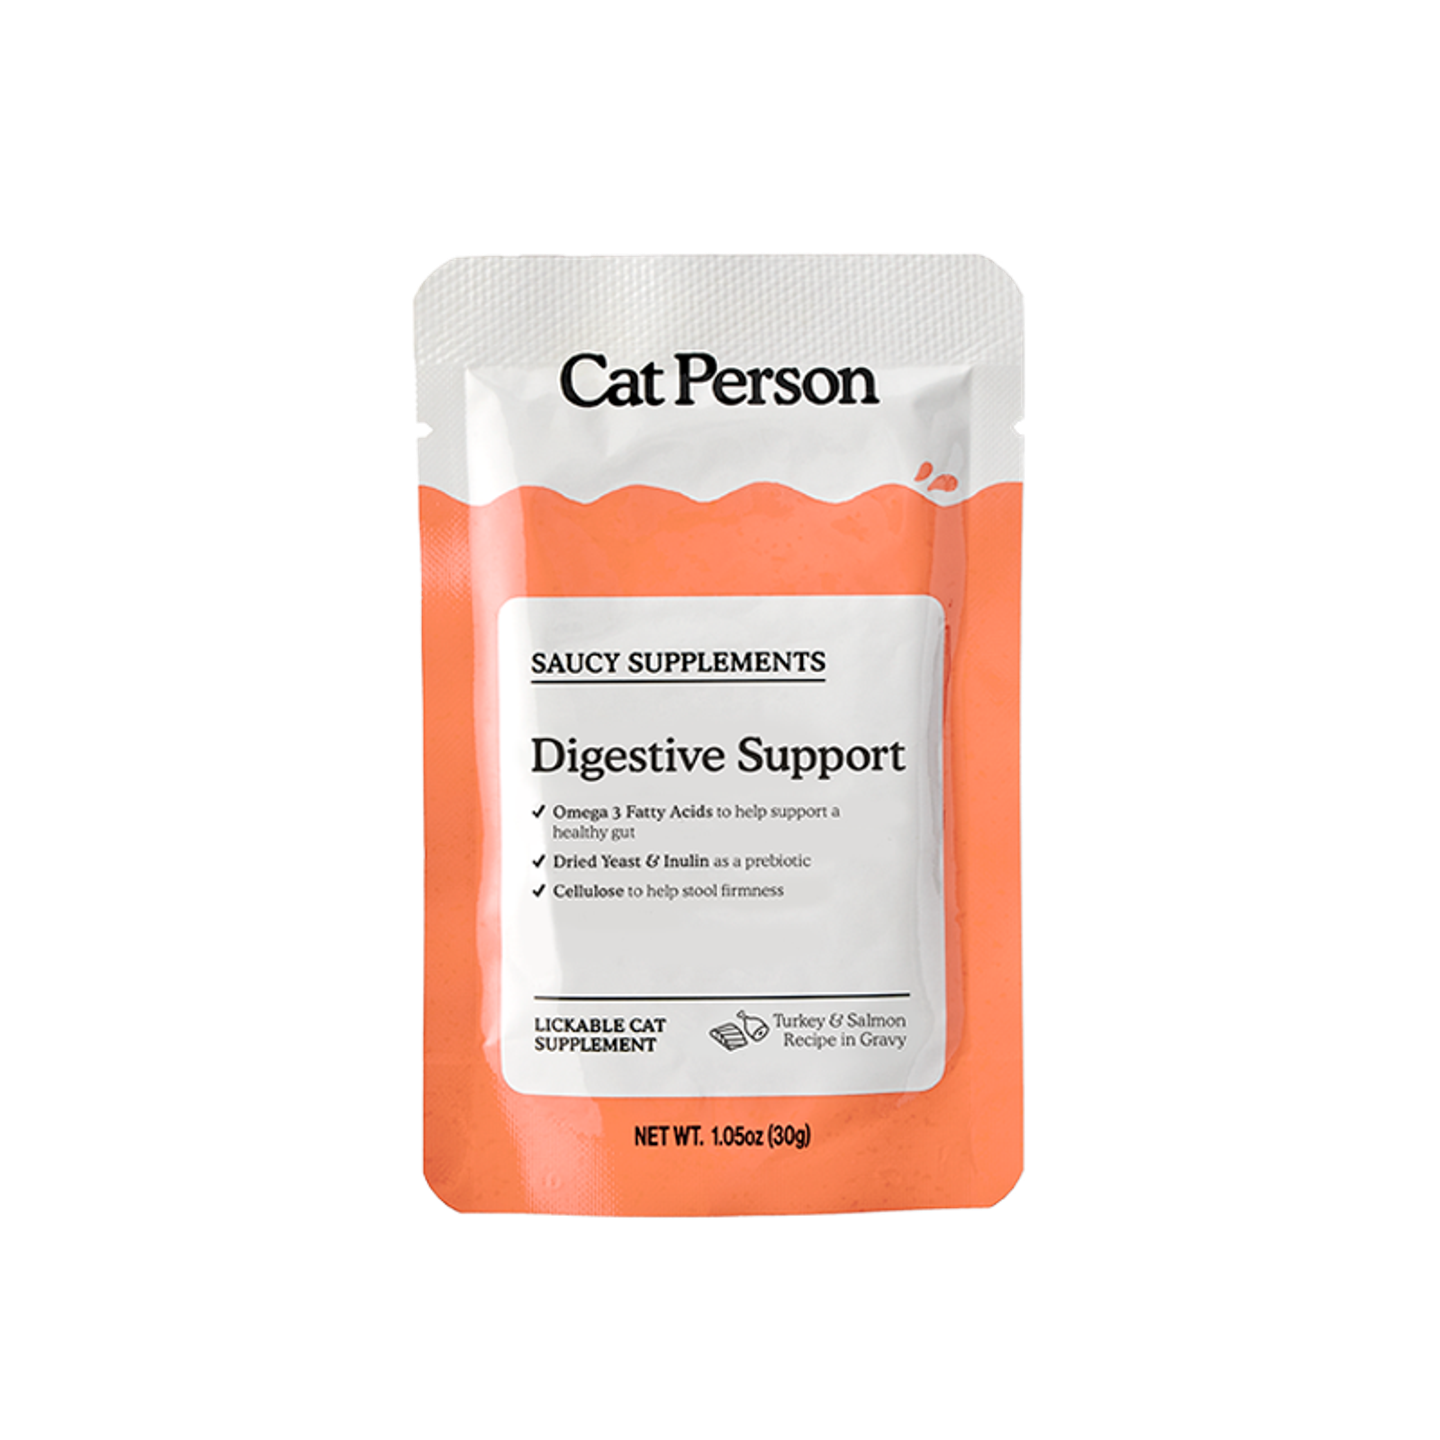 Pouch of Cat Person Digestive Support Supplement